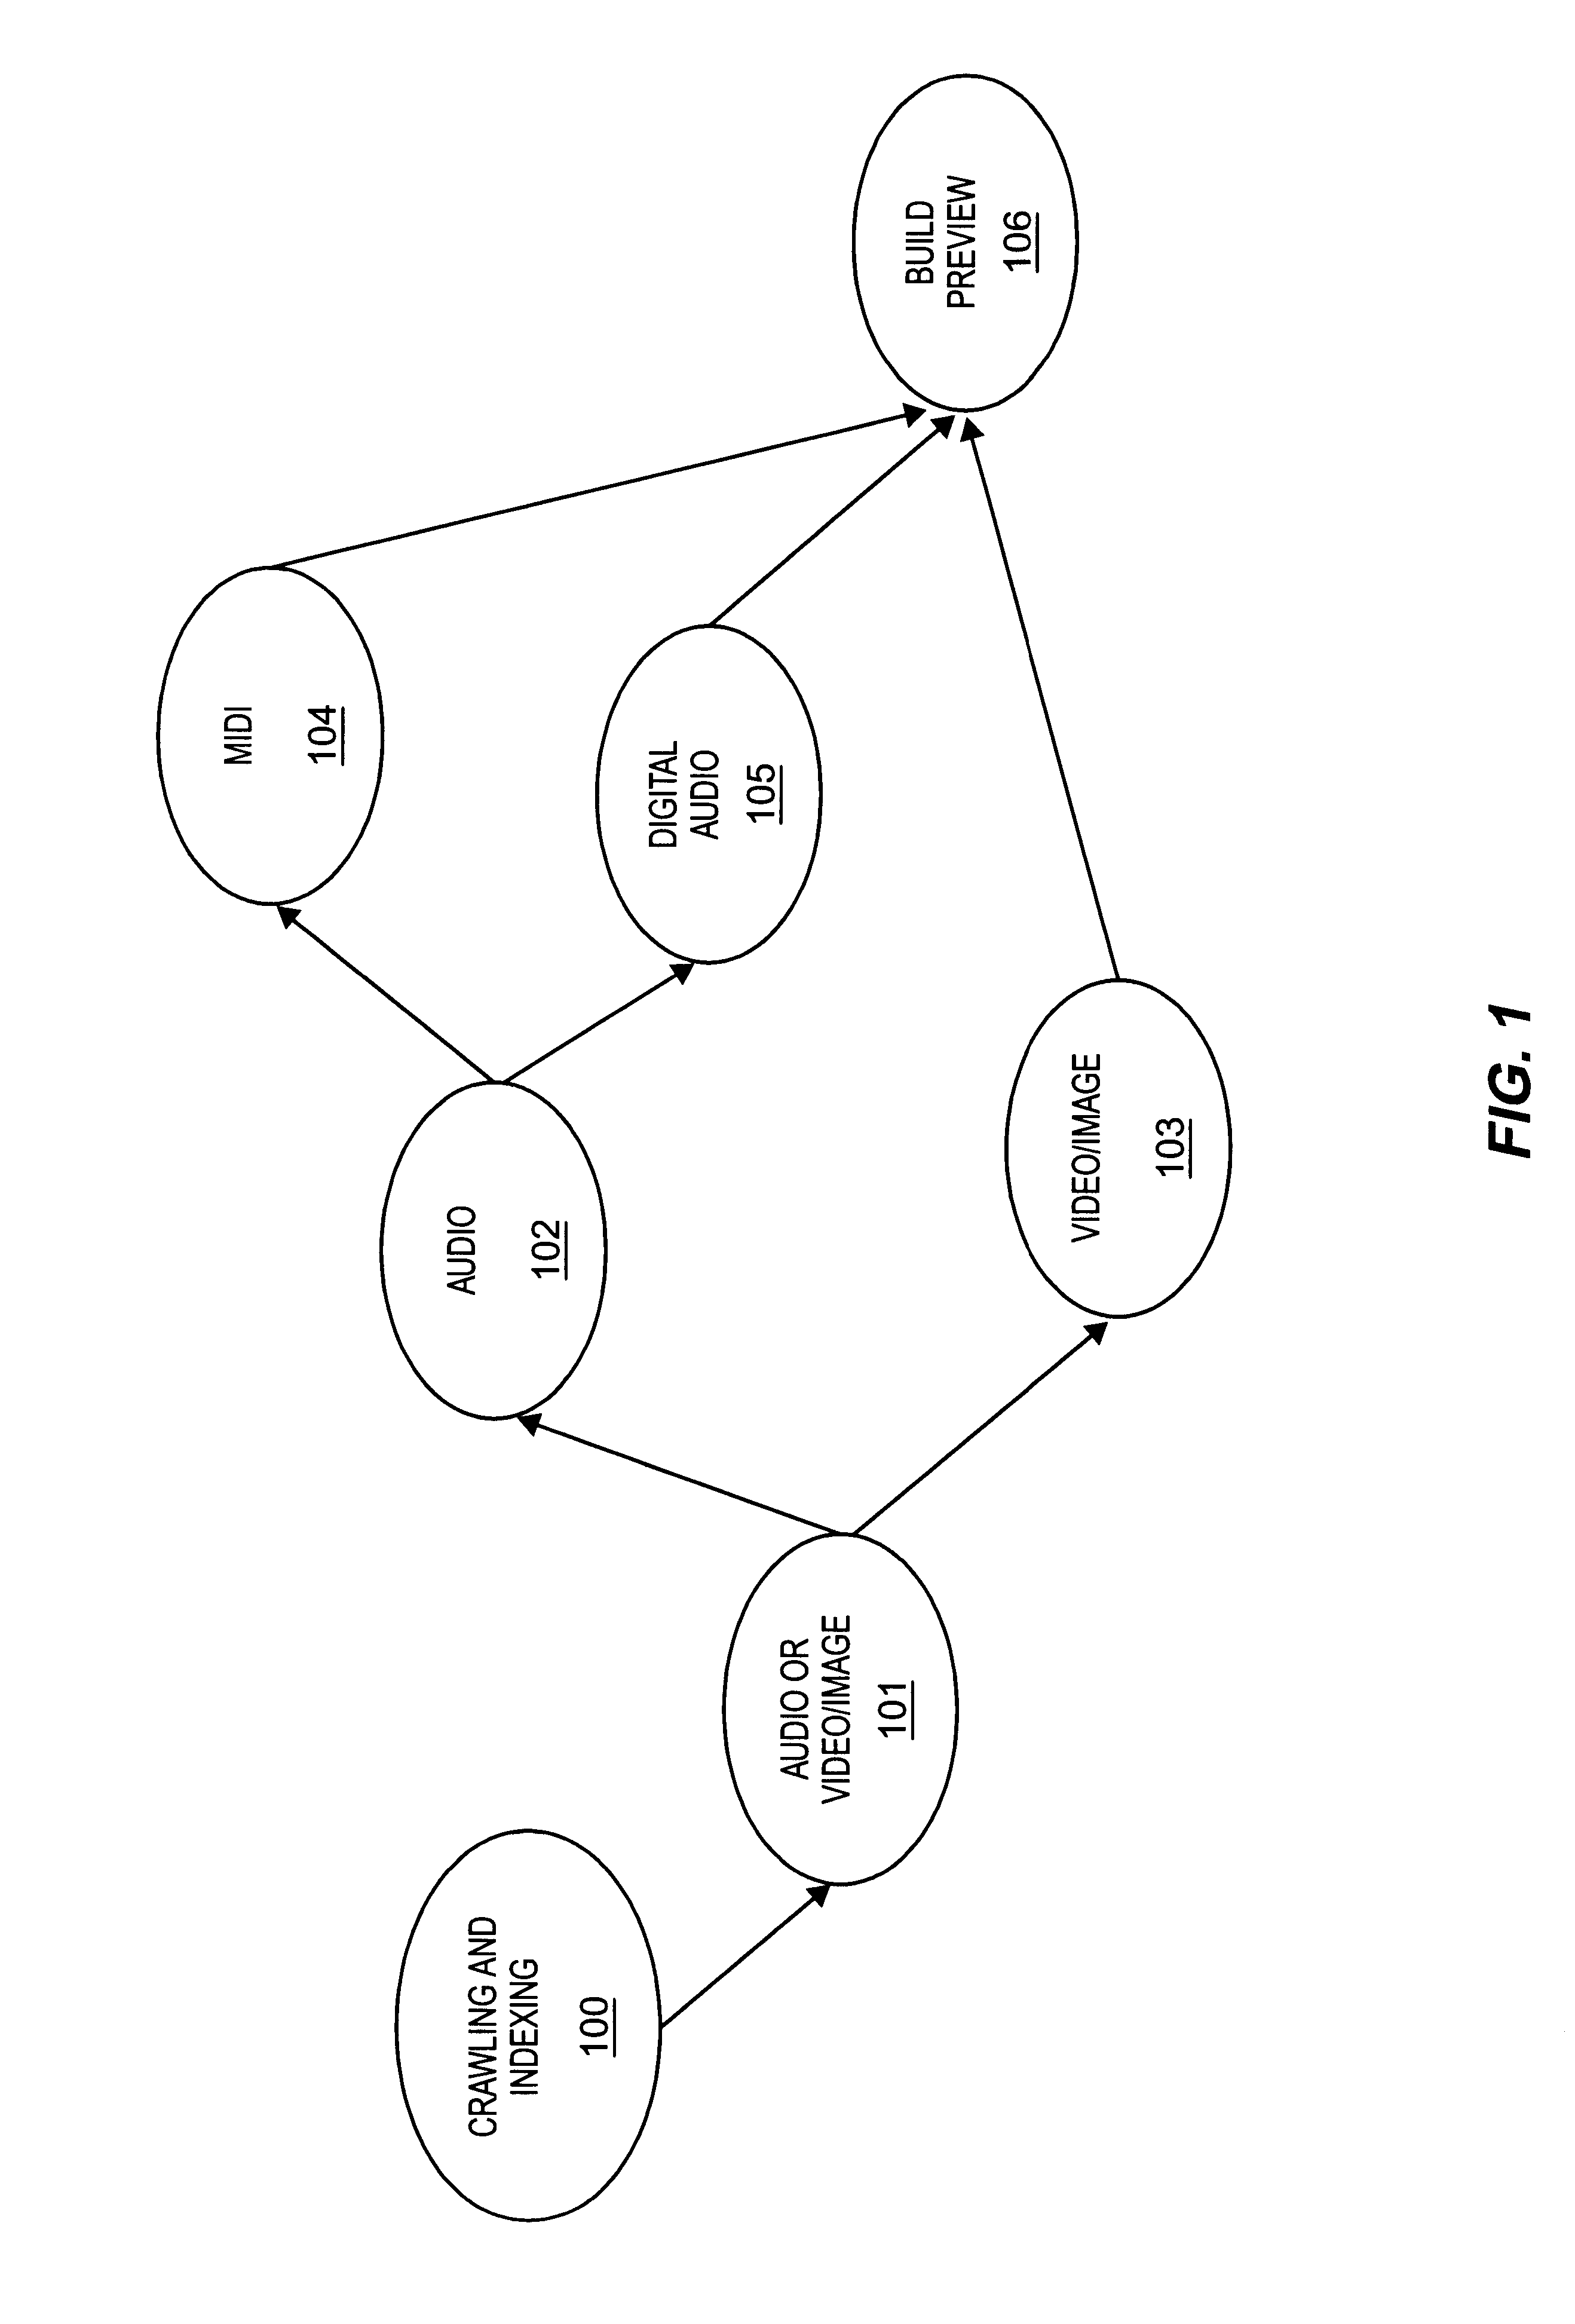 Method and apparatus for uploading, indexing, analyzing, and searching media content